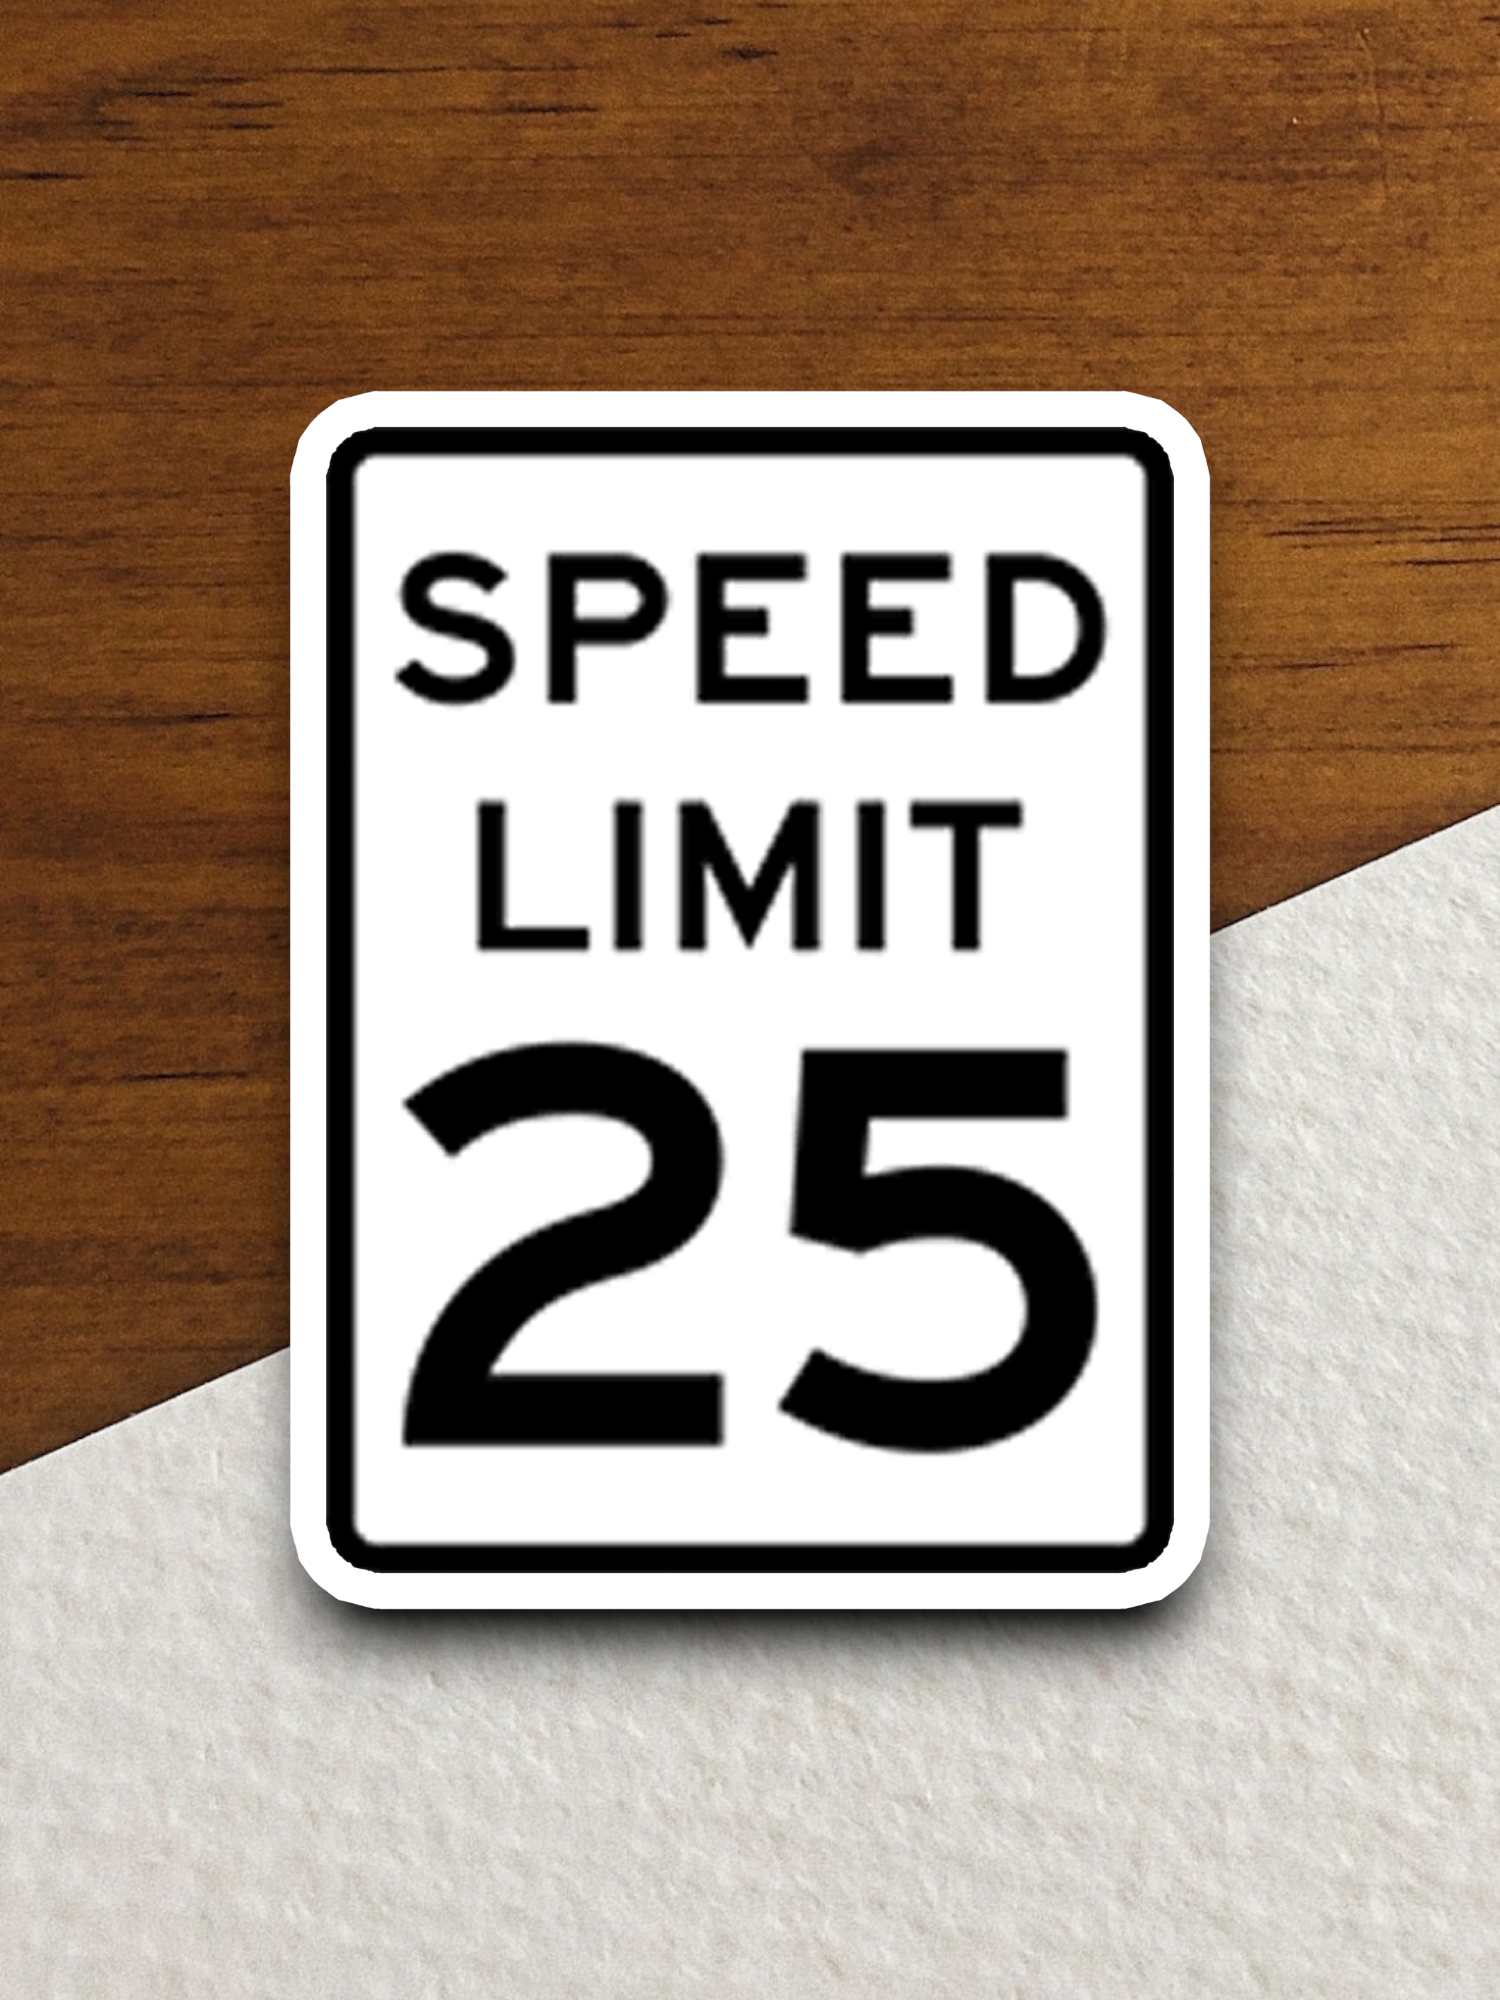 25 Miles Per Hour Speed Limit Road Sign Sticker